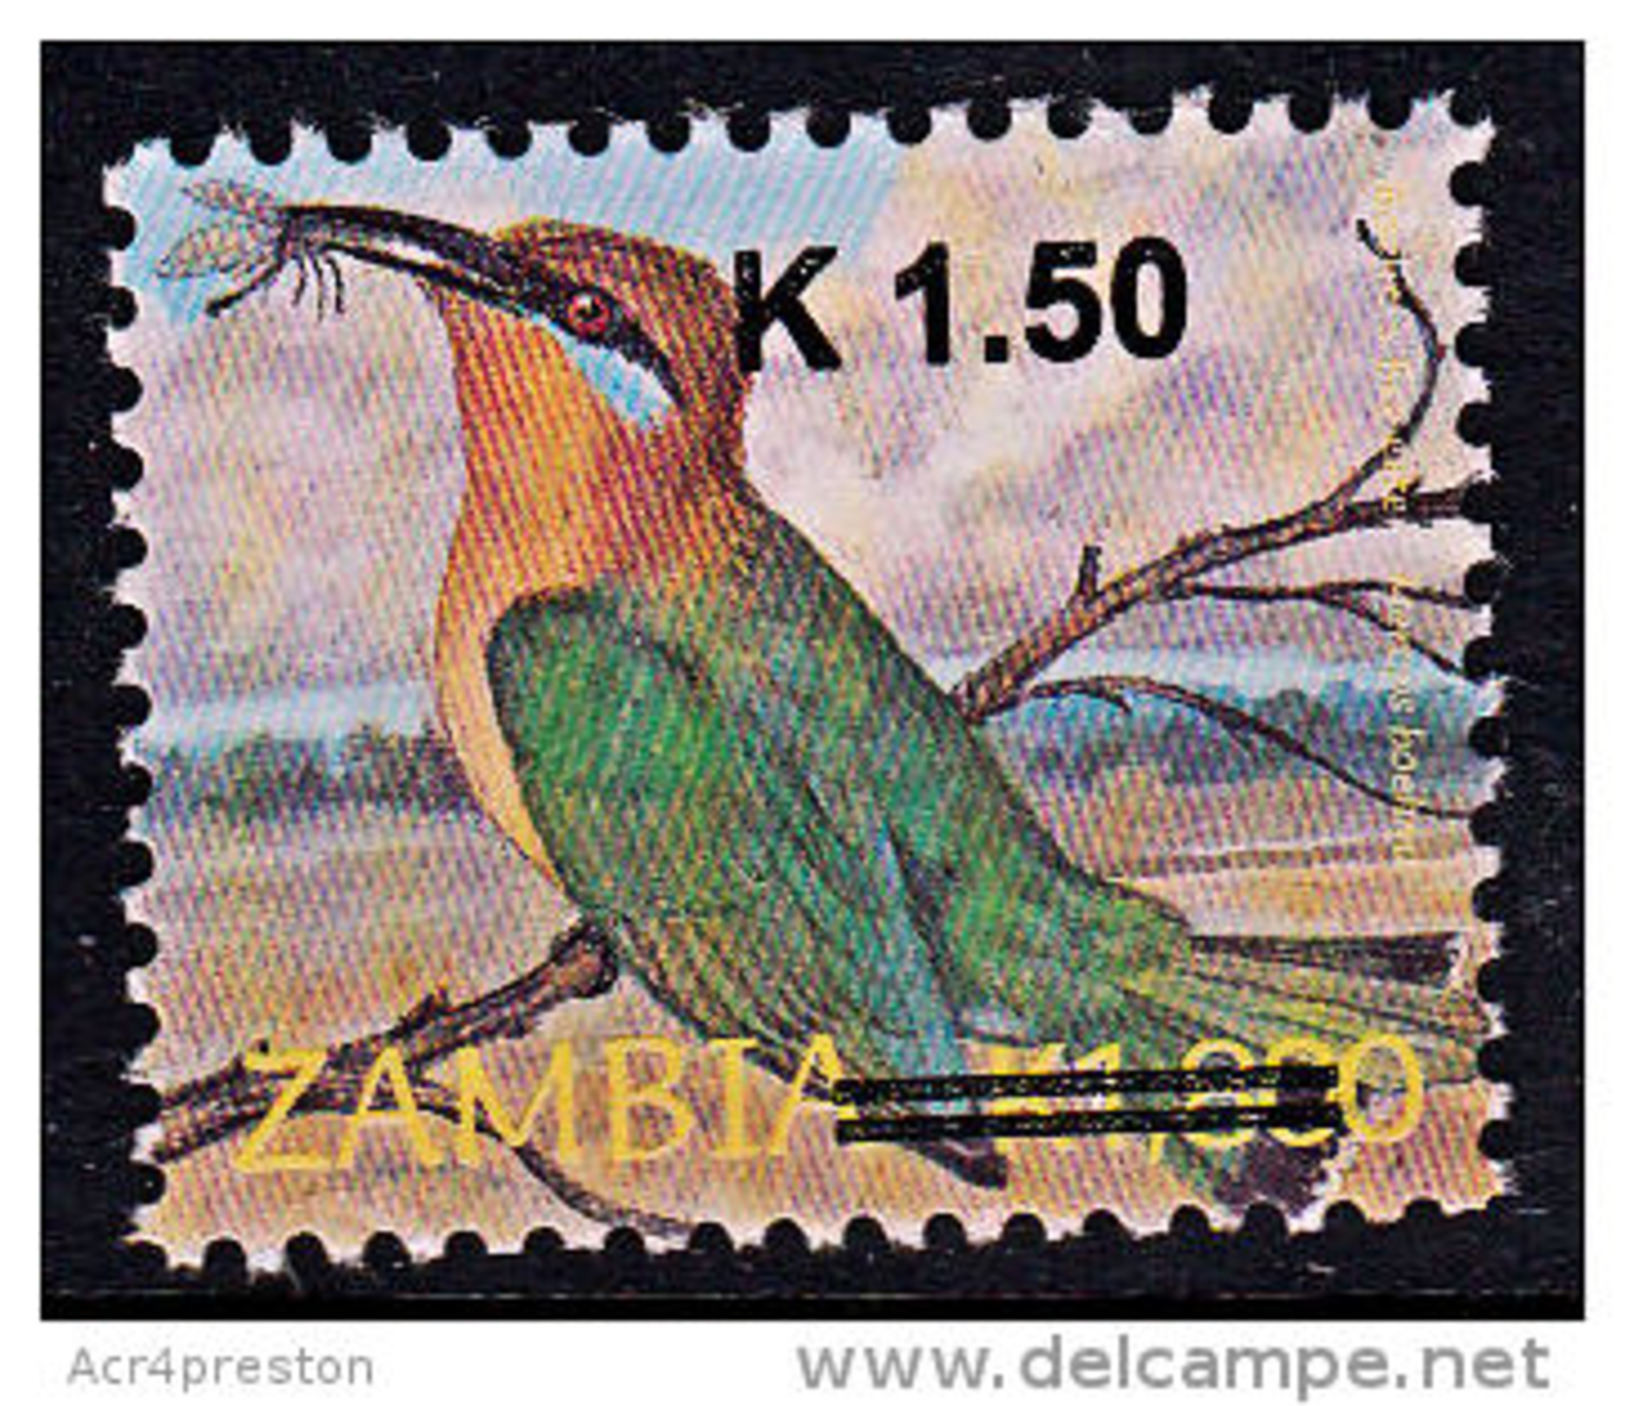 Zm1125 ZAMBIA 2014, New Currency K1.50 Surcharge On K1,800 Small Birds  MNH (Issued 02-05-2014) - Zambia (1965-...)